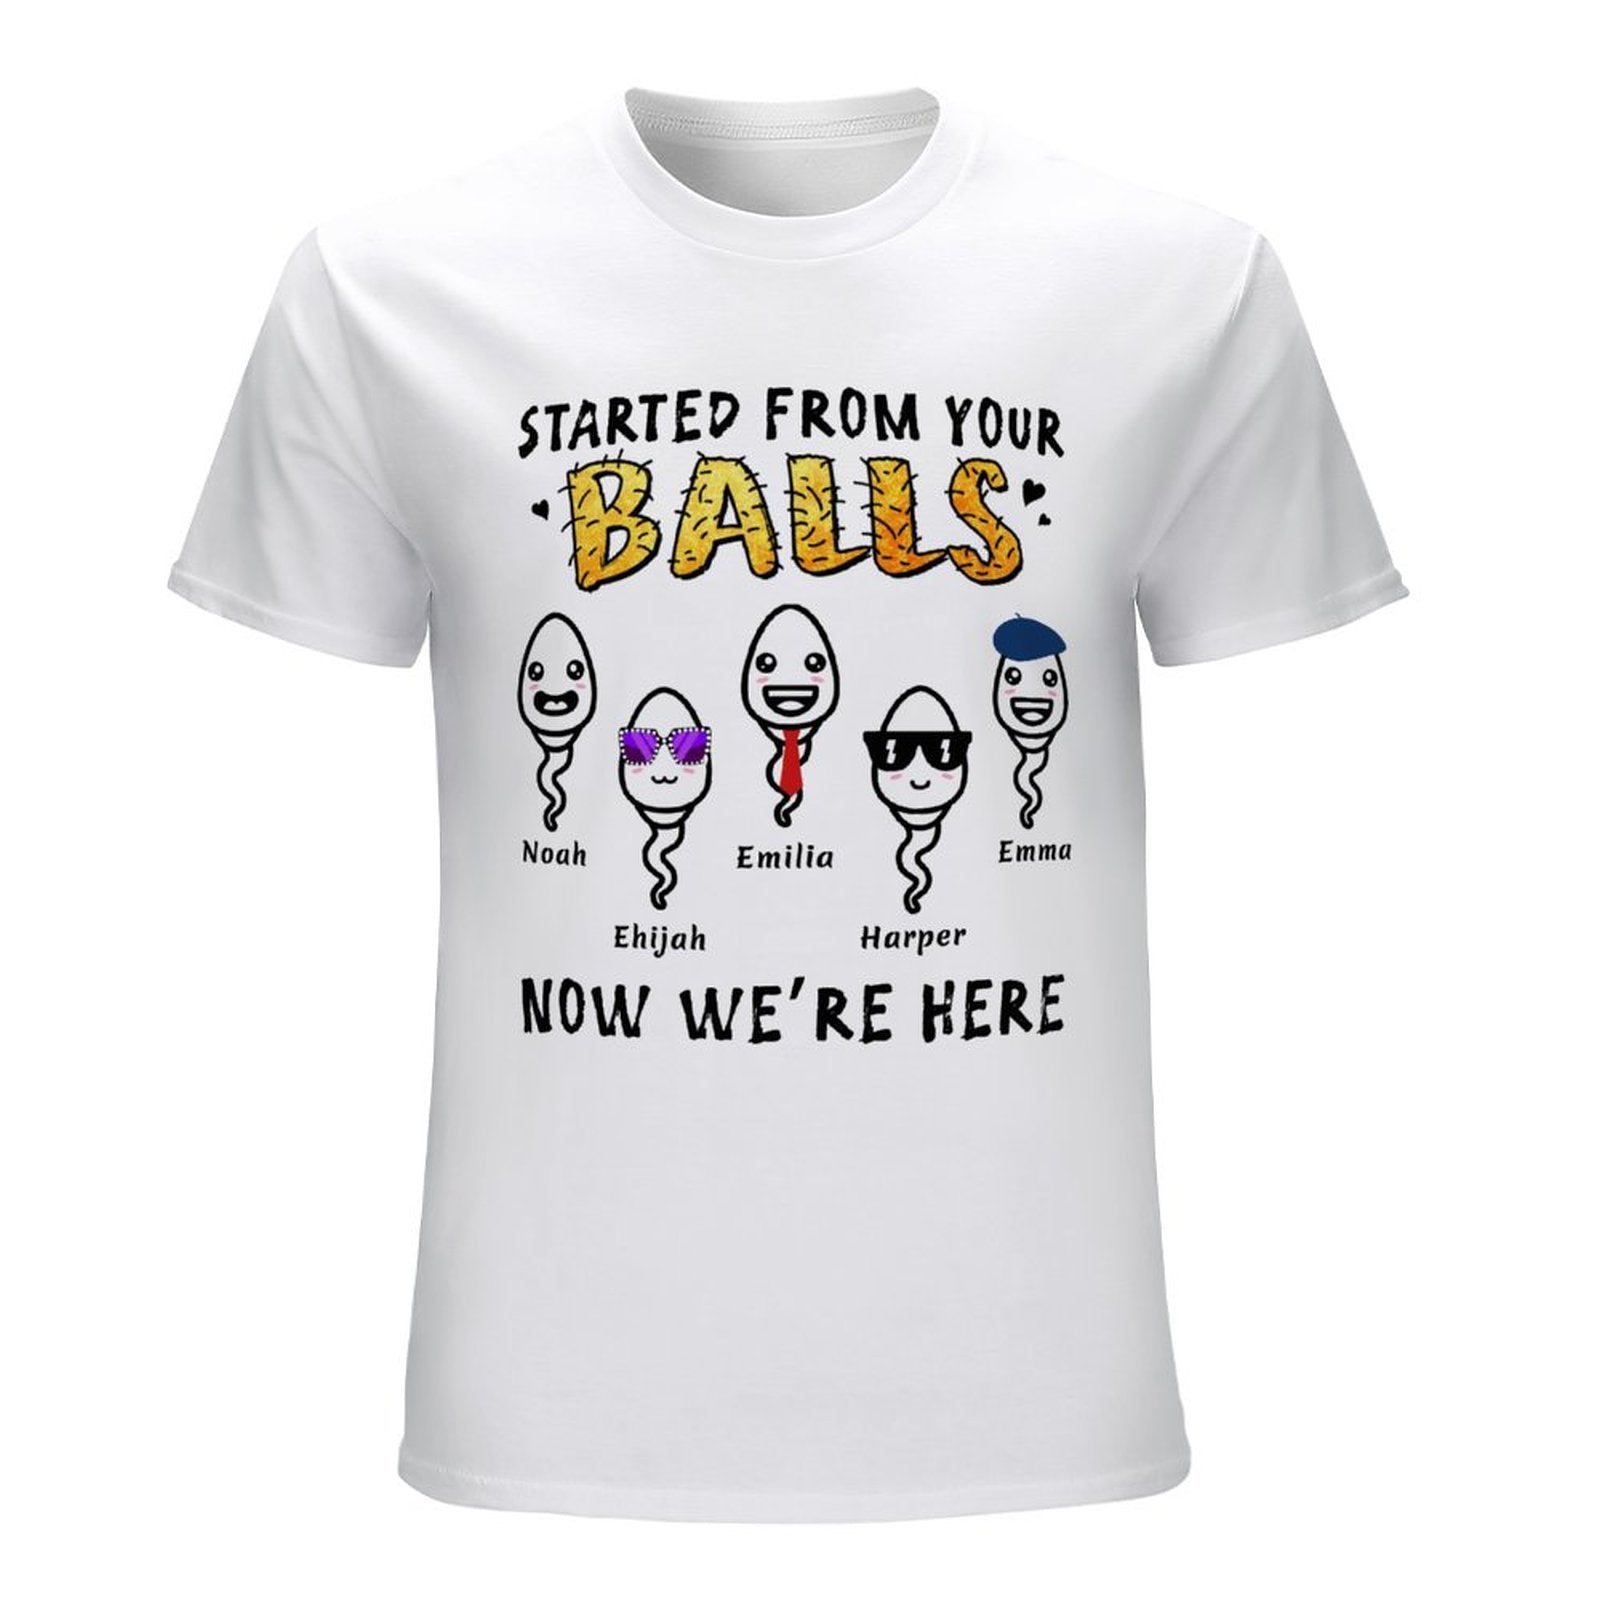 Personalized T Shirt for Men, Custom Father's Day Shirt, Started From Your Balls Funny Dad Shirt, Custom Kids Name Shirt, Father's Day Gift - colorfulcustom